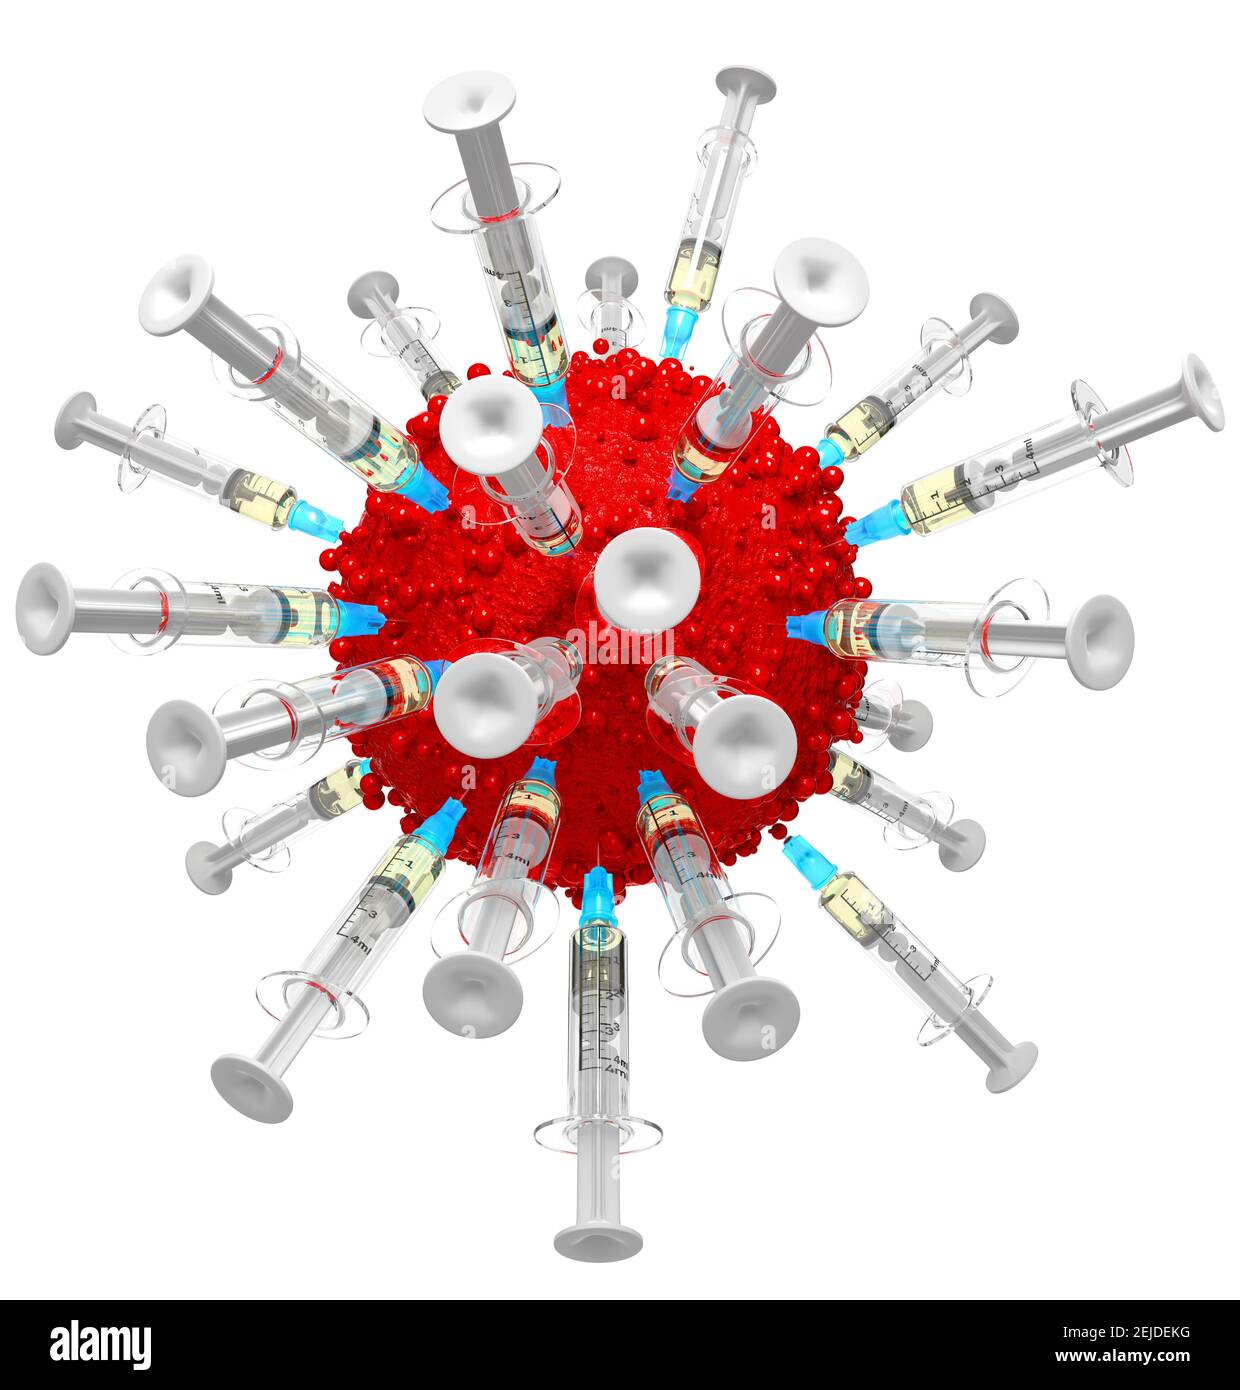 Coronavirus Vaccine. A virus being attacked by syringes containing the COVID-19 vaccinations. White background, cut out. Fighting the virus. Stock Photo